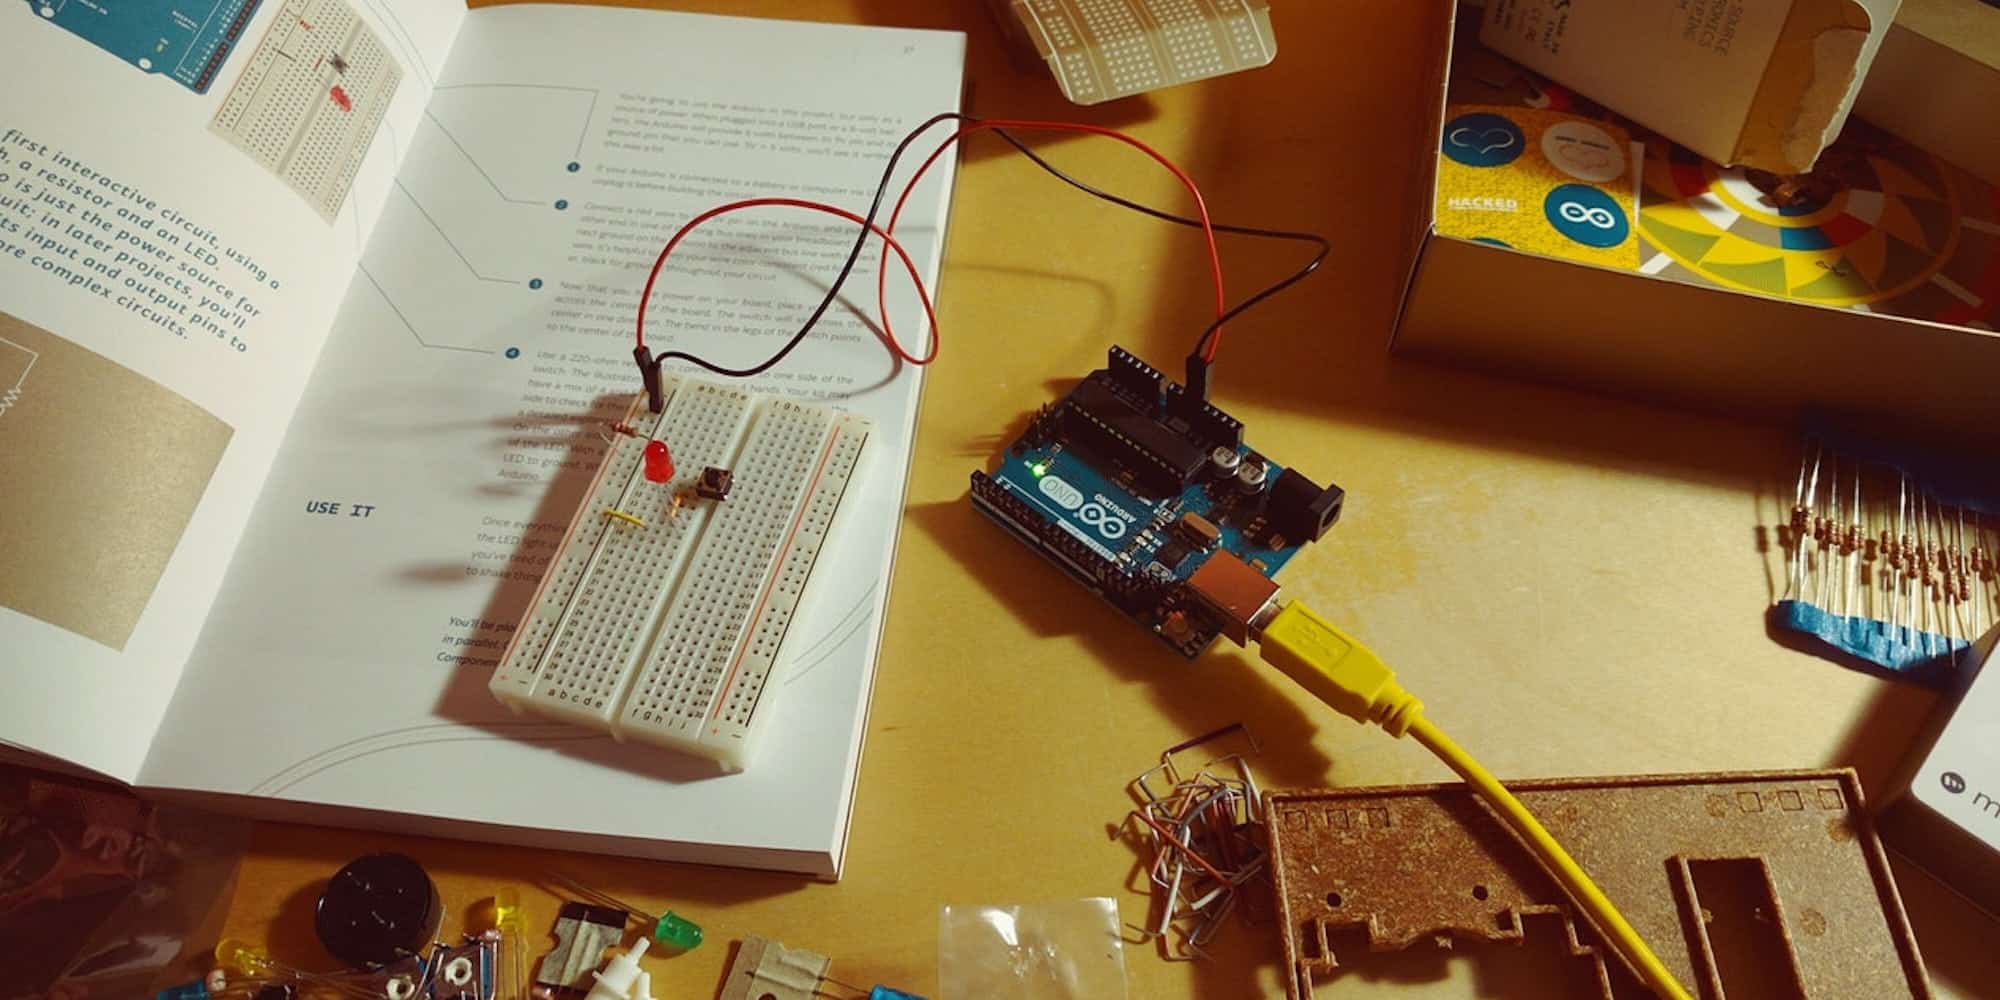 This bundle includes all the instruction and materials you need to get started with Arduino.